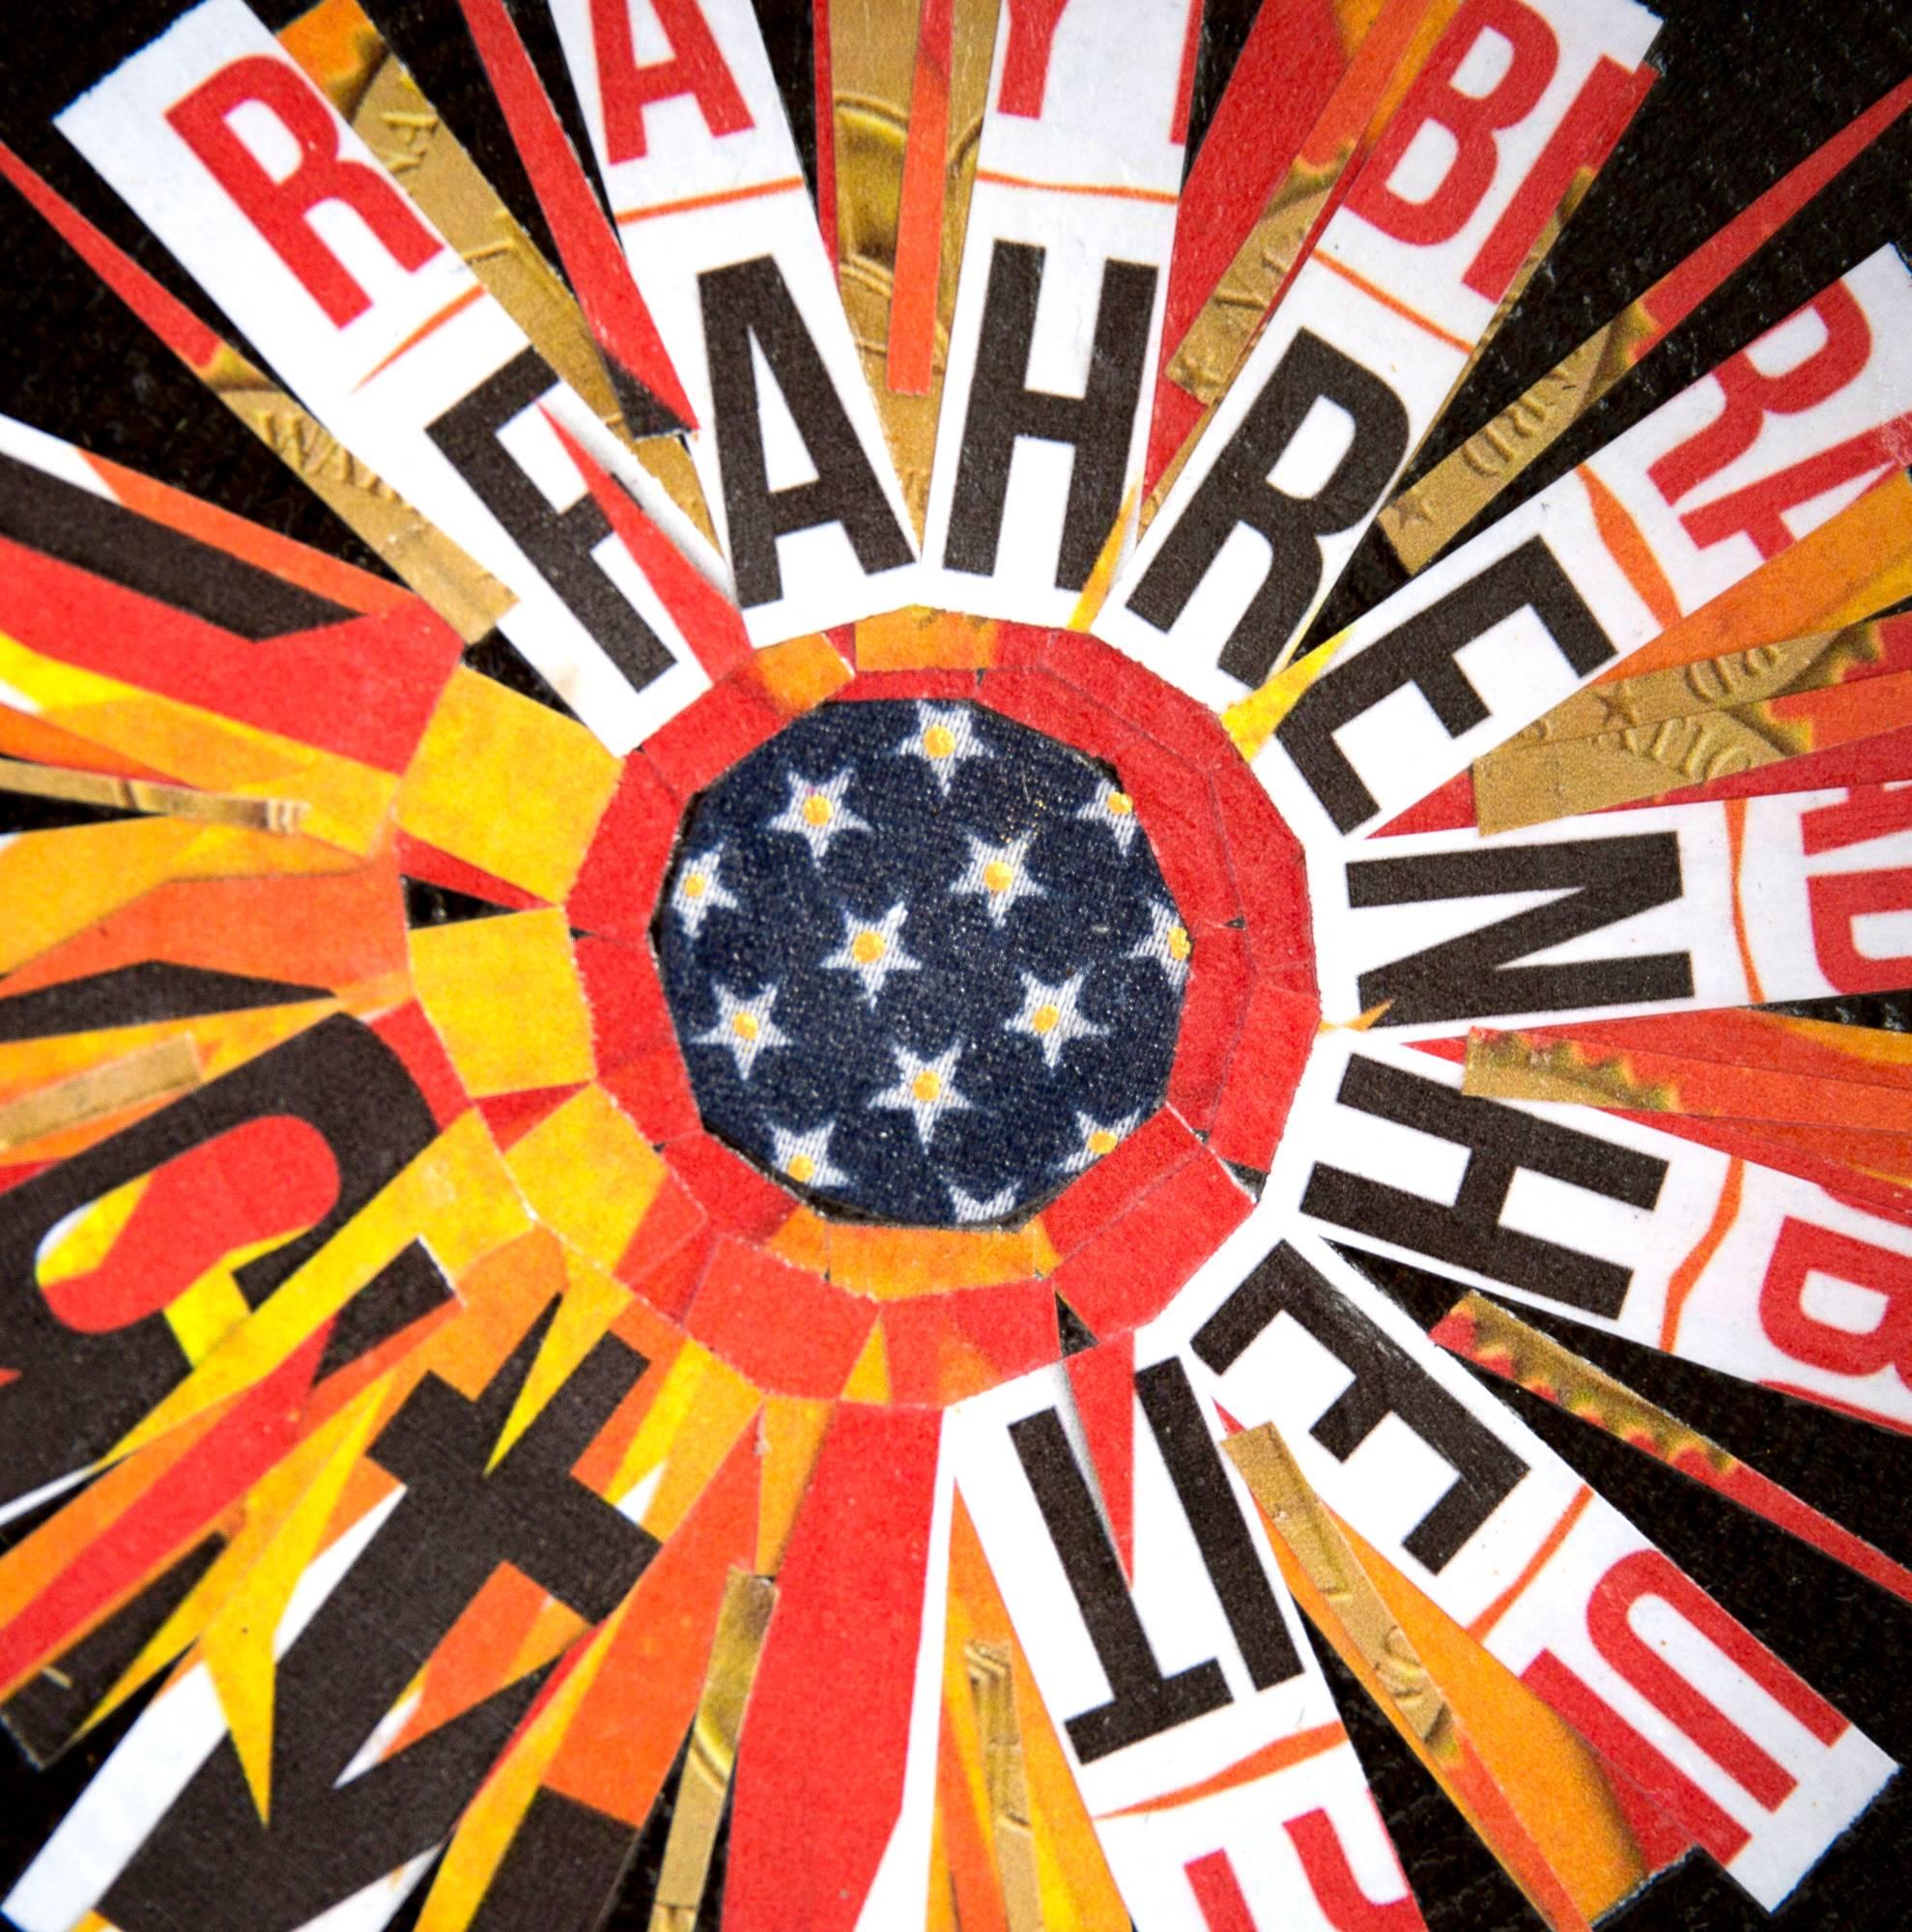 Fire & Fury forms part of a new series of works by Sheldon on dystopian themes. Incorporating elements of a US flag, gold paint, and the disassembled, sliced up cover of Ray Bradbury's classic novel, glued onto a burned frying pan, this collage is a